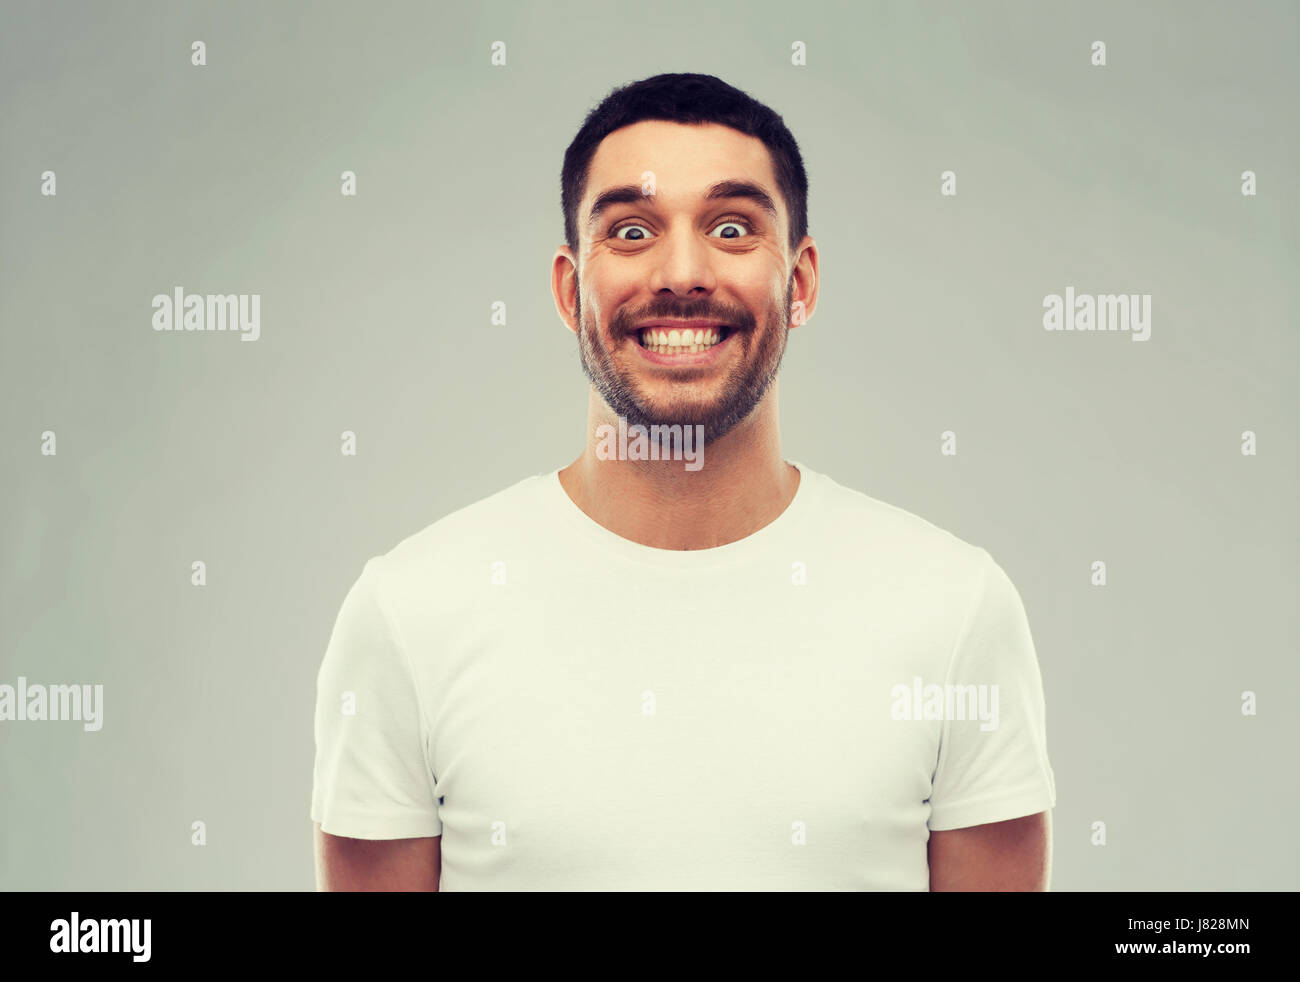 man with funny face over gray background Stock Photo